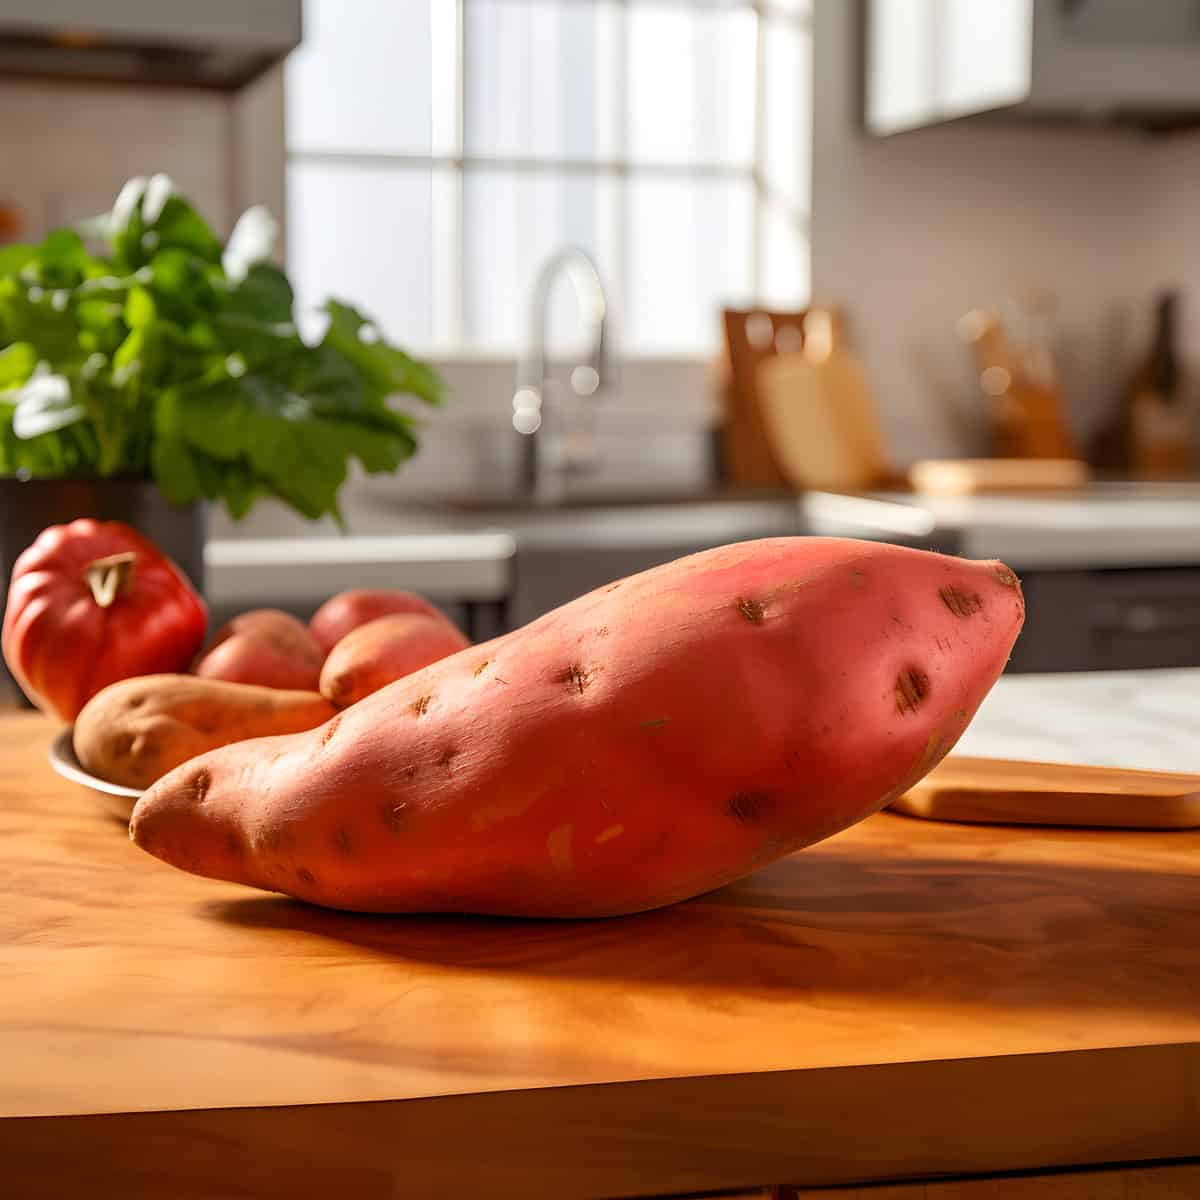 Jersey Red Sweet Potatoes on a kitchen counter